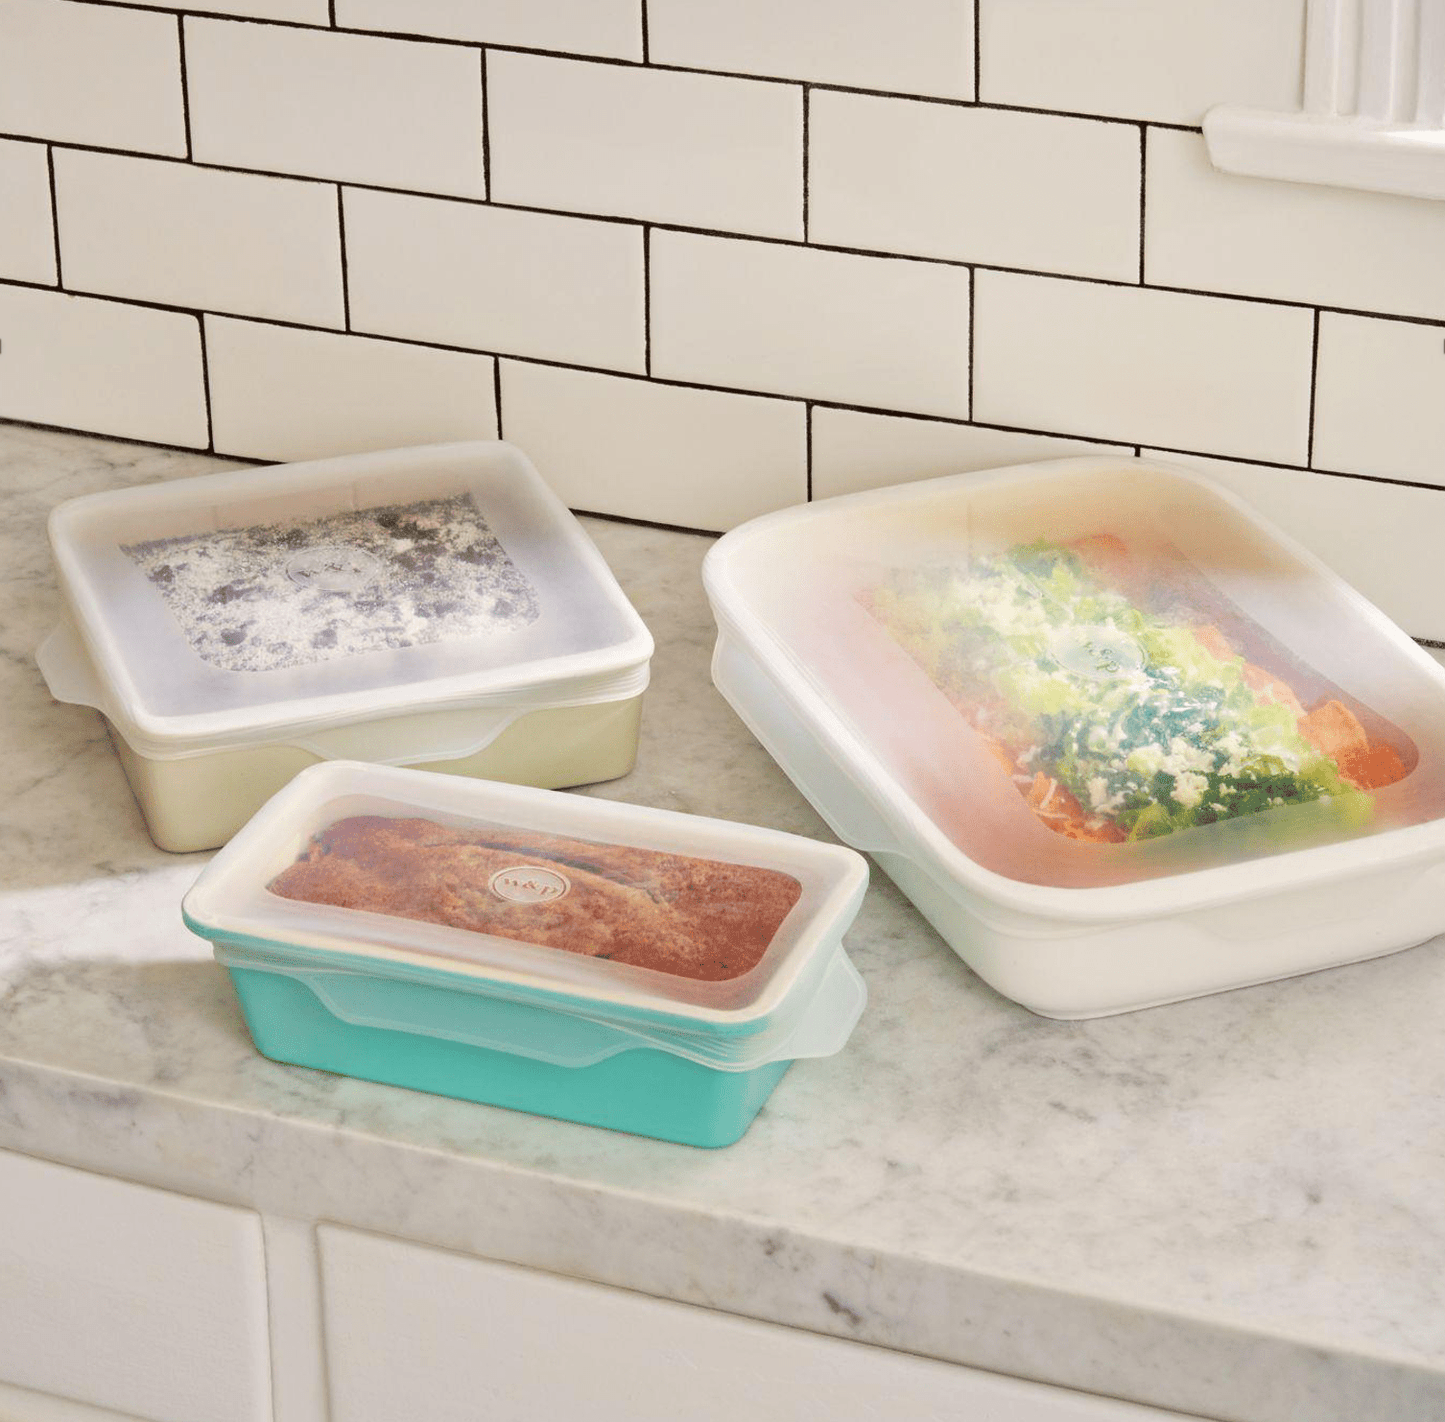 Silicone Stretch Baking Lids Set - Three different sizes shown covering pans of food - Echo Market